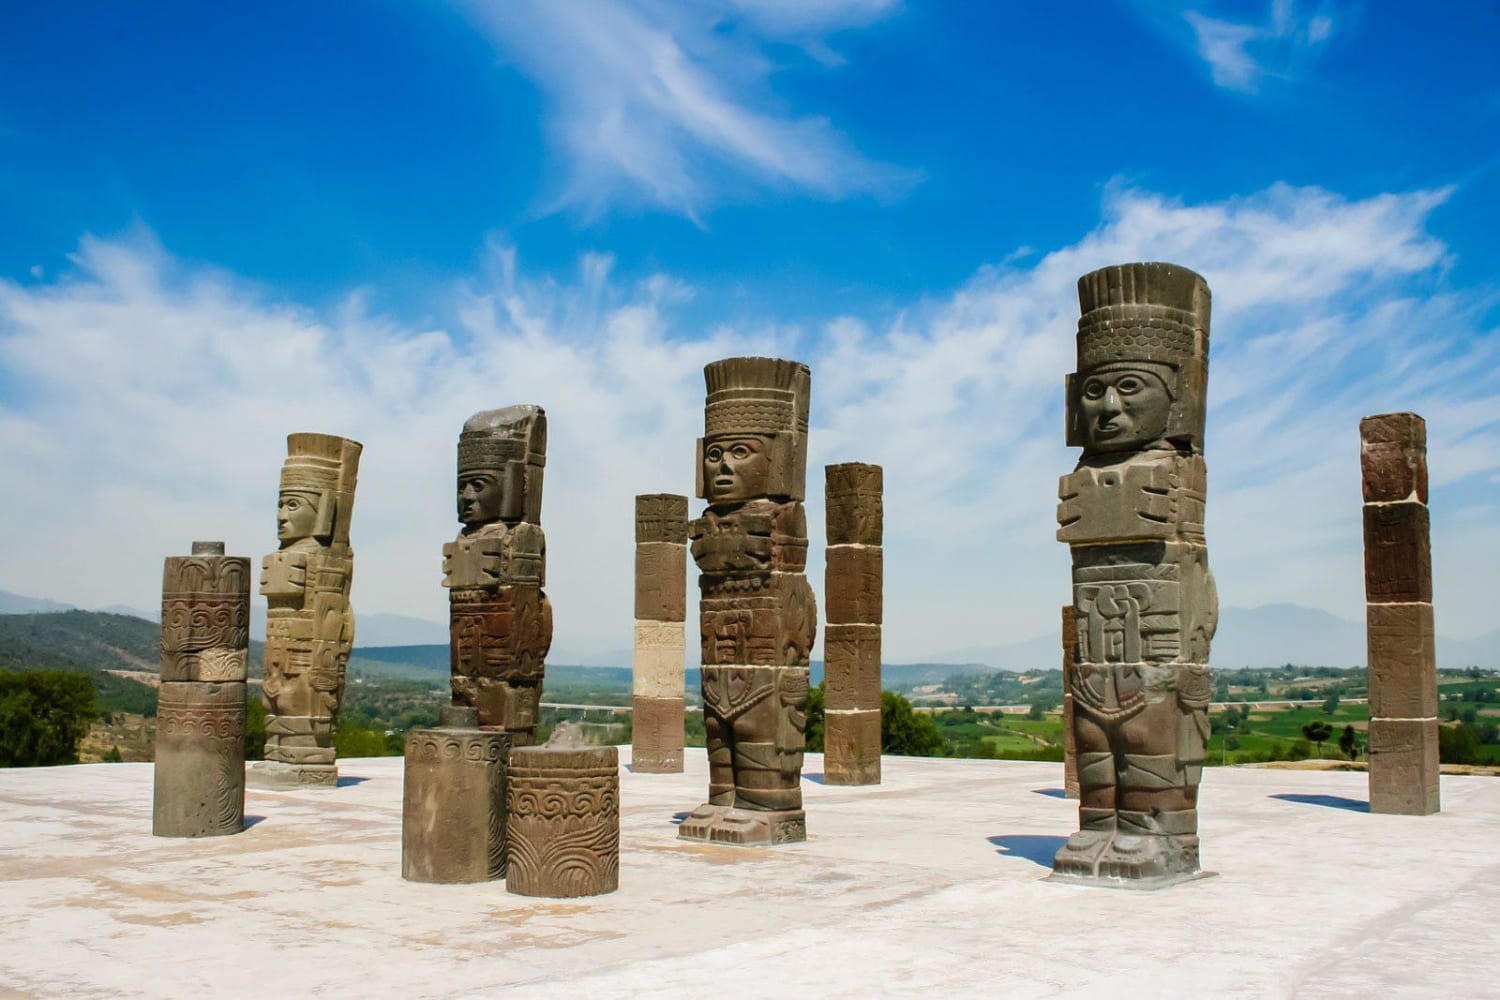 Pillars shaped like warriors on top the Pyramid of Quetzalcoatl at Tula, 4.6m high. Mexico, Toltec civilization, 10th-11th century CE